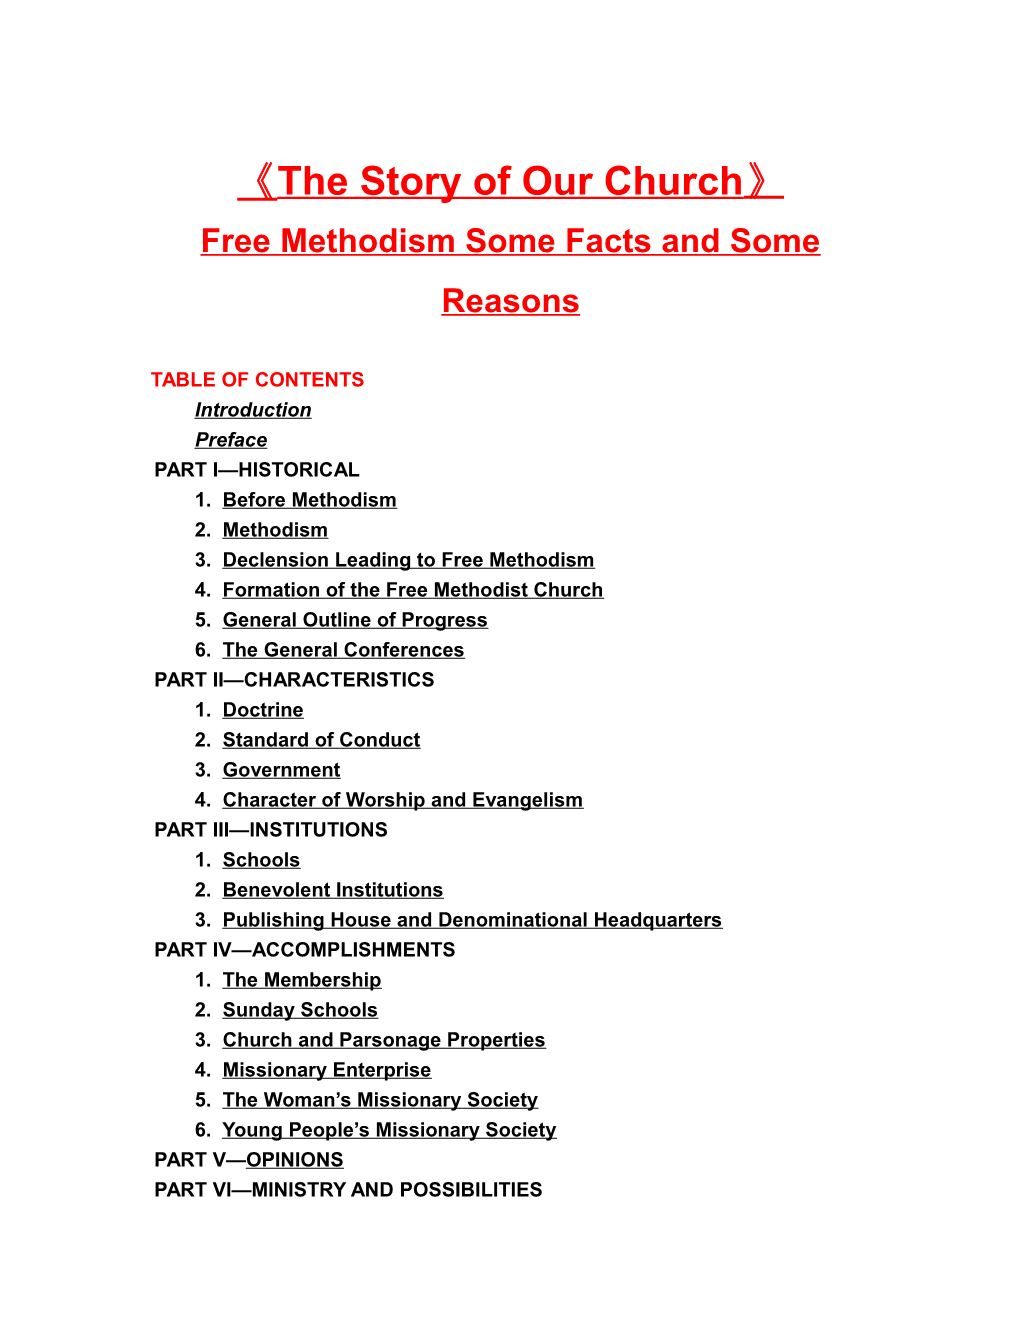 Free Methodism Some Facts and Some Reasons